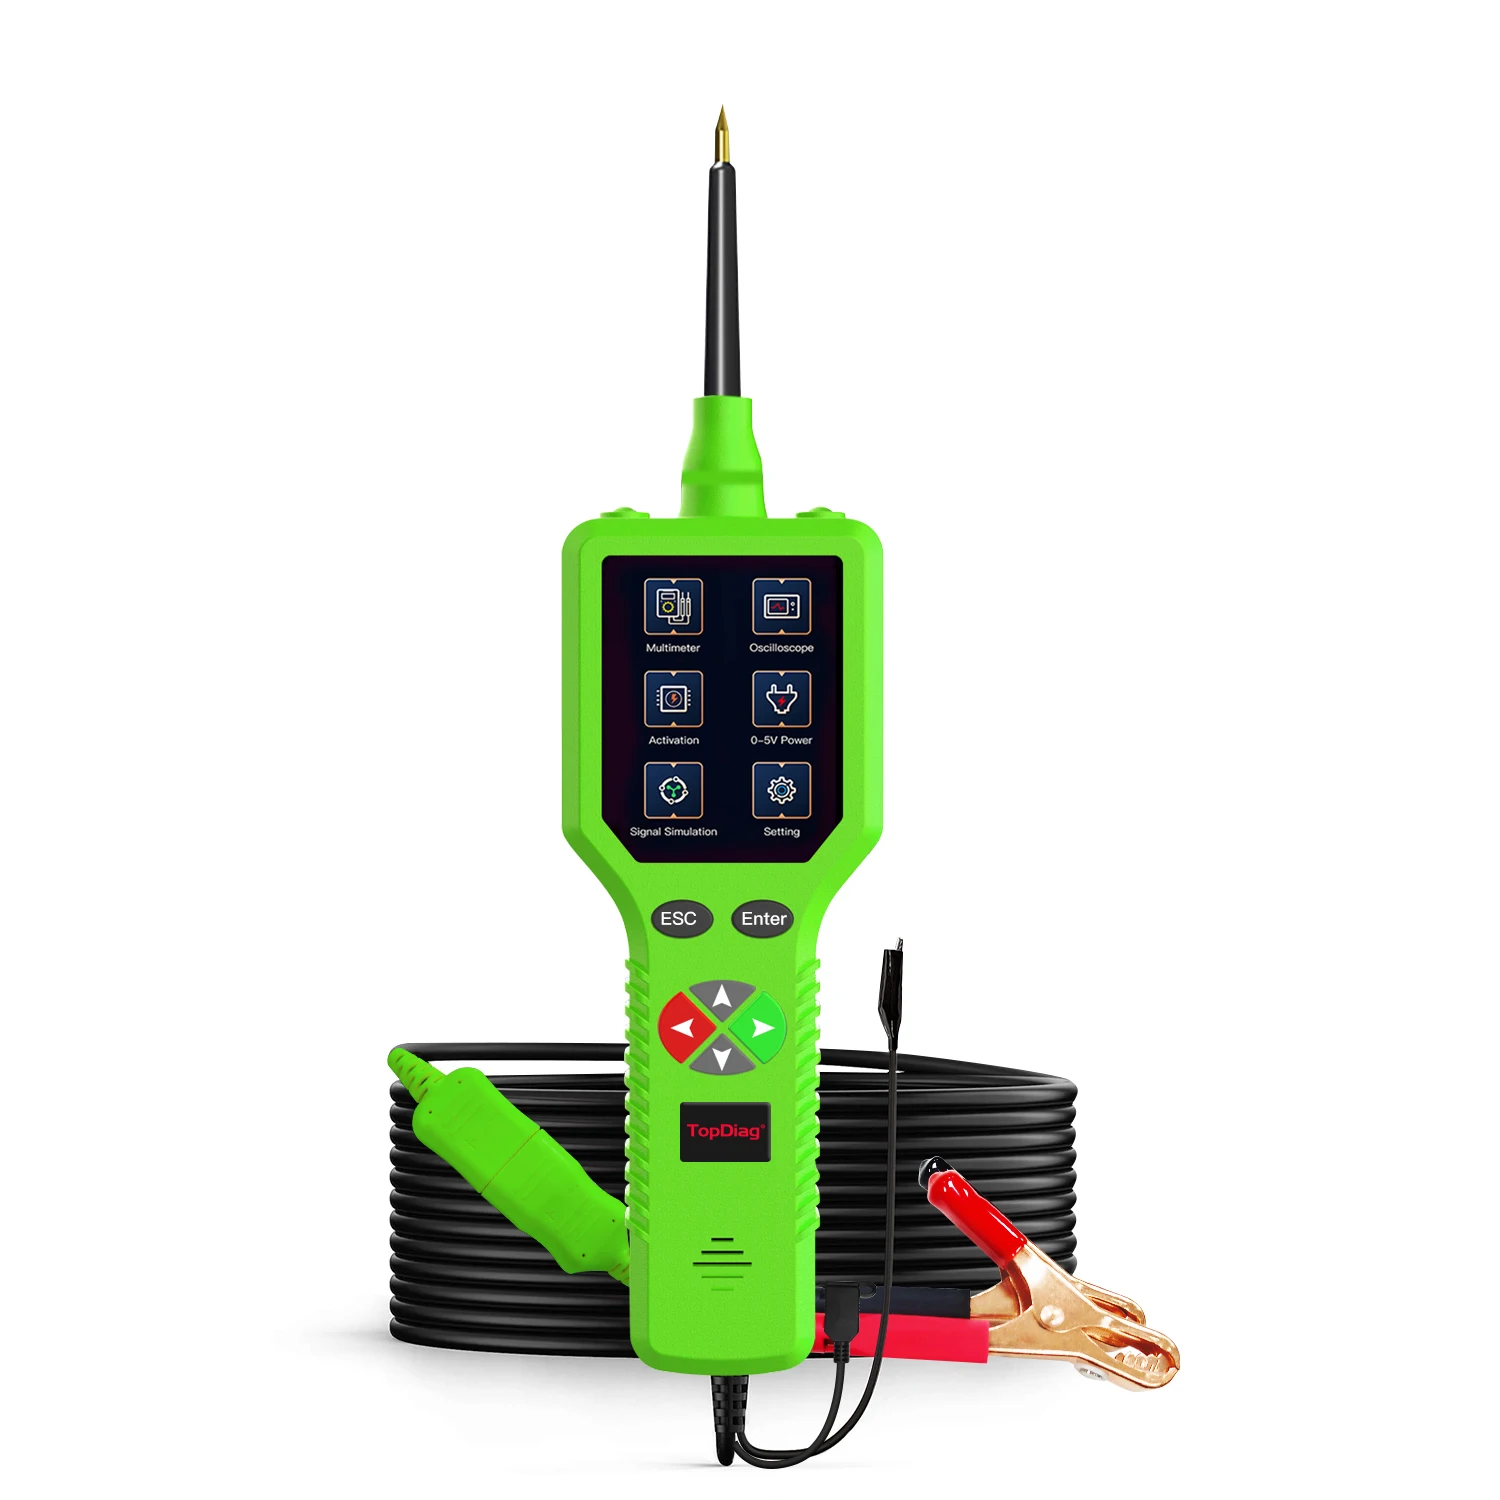 JDIAG P100 Pro 9V-30V Automotive Circuit Tester Powerful Probe Quickly Detect Automotive Circuit Electronic System Battery Test